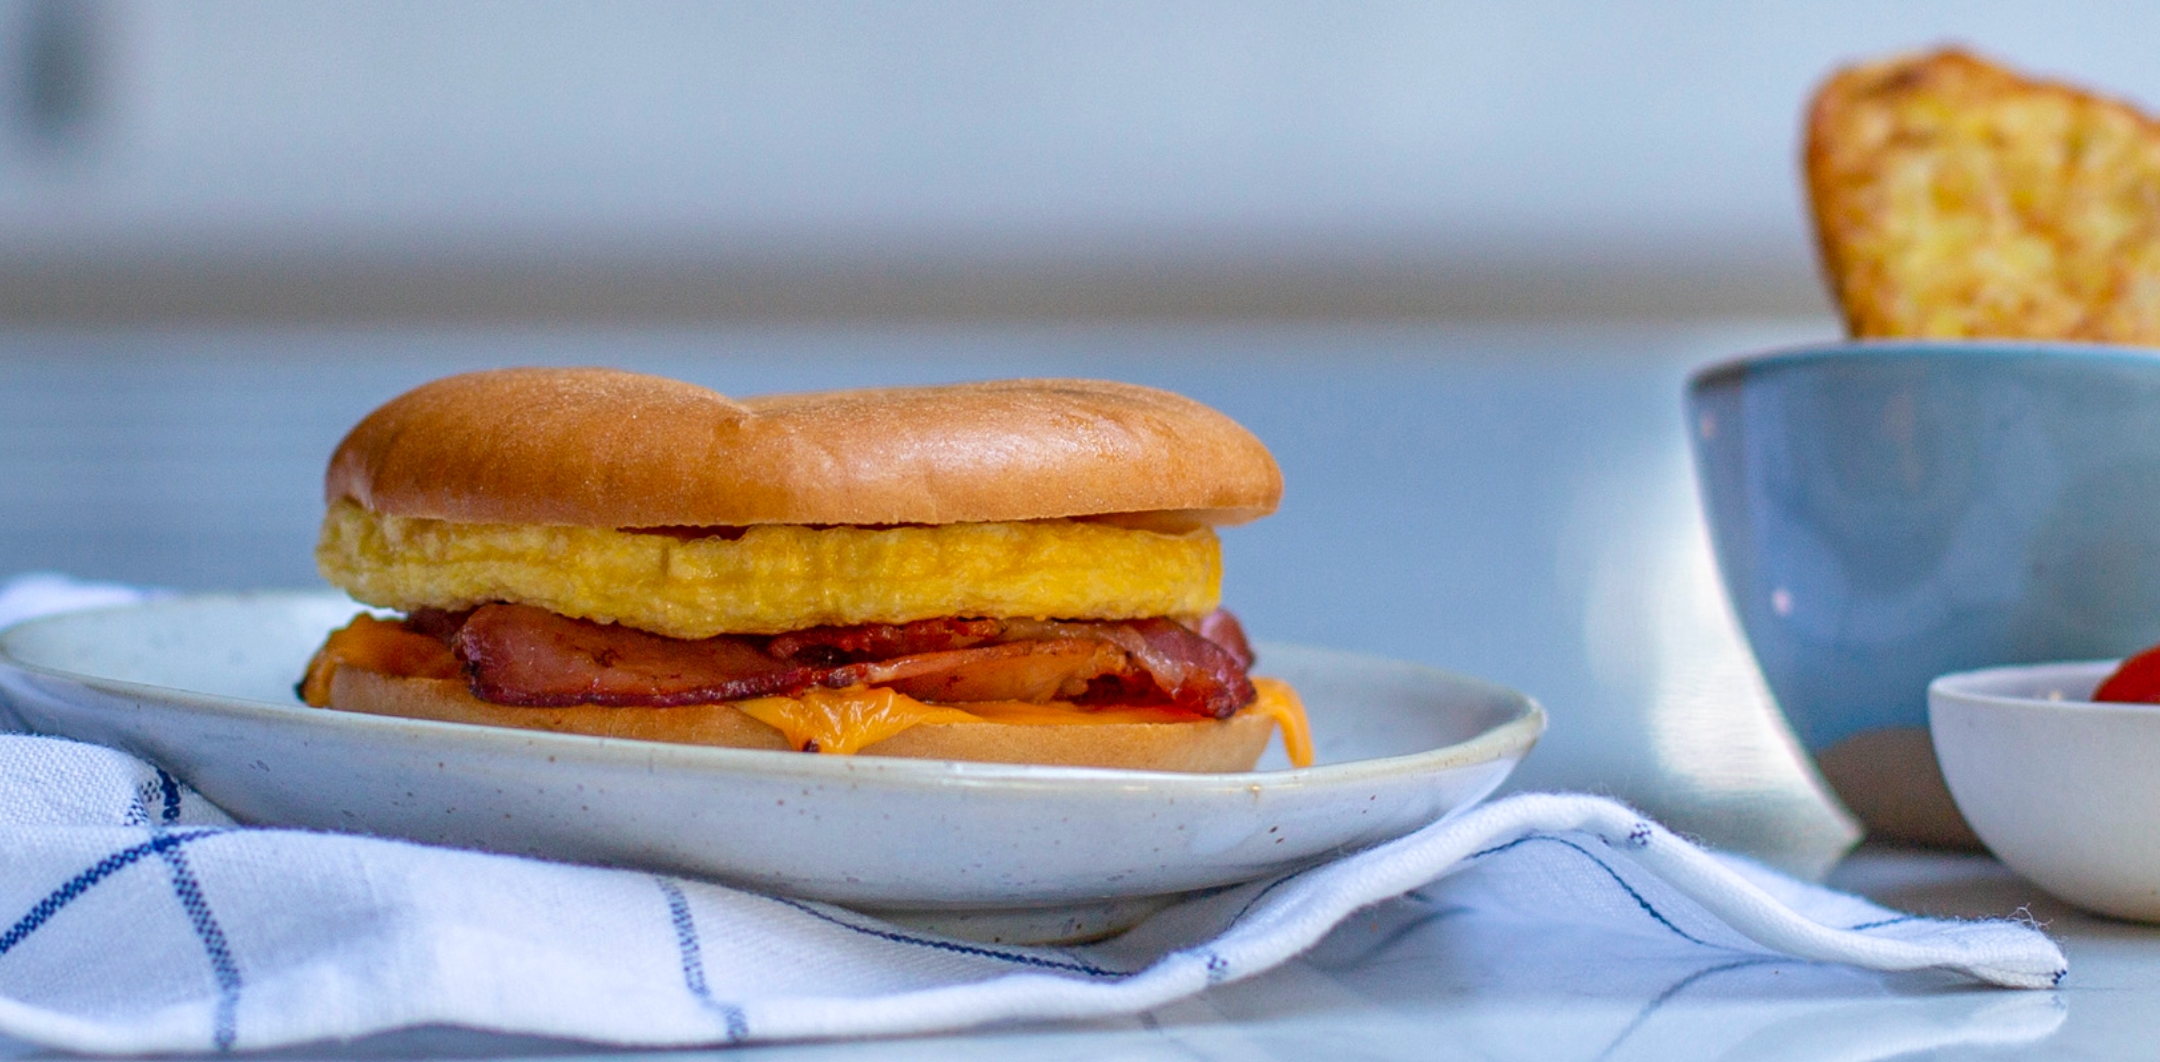 https://drewandcole.com/wp-content/uploads/2021/10/Breakfast-Maker-Hub-Images-Classic-Bacon-Egg-and-Cheese-Bagel.jpg